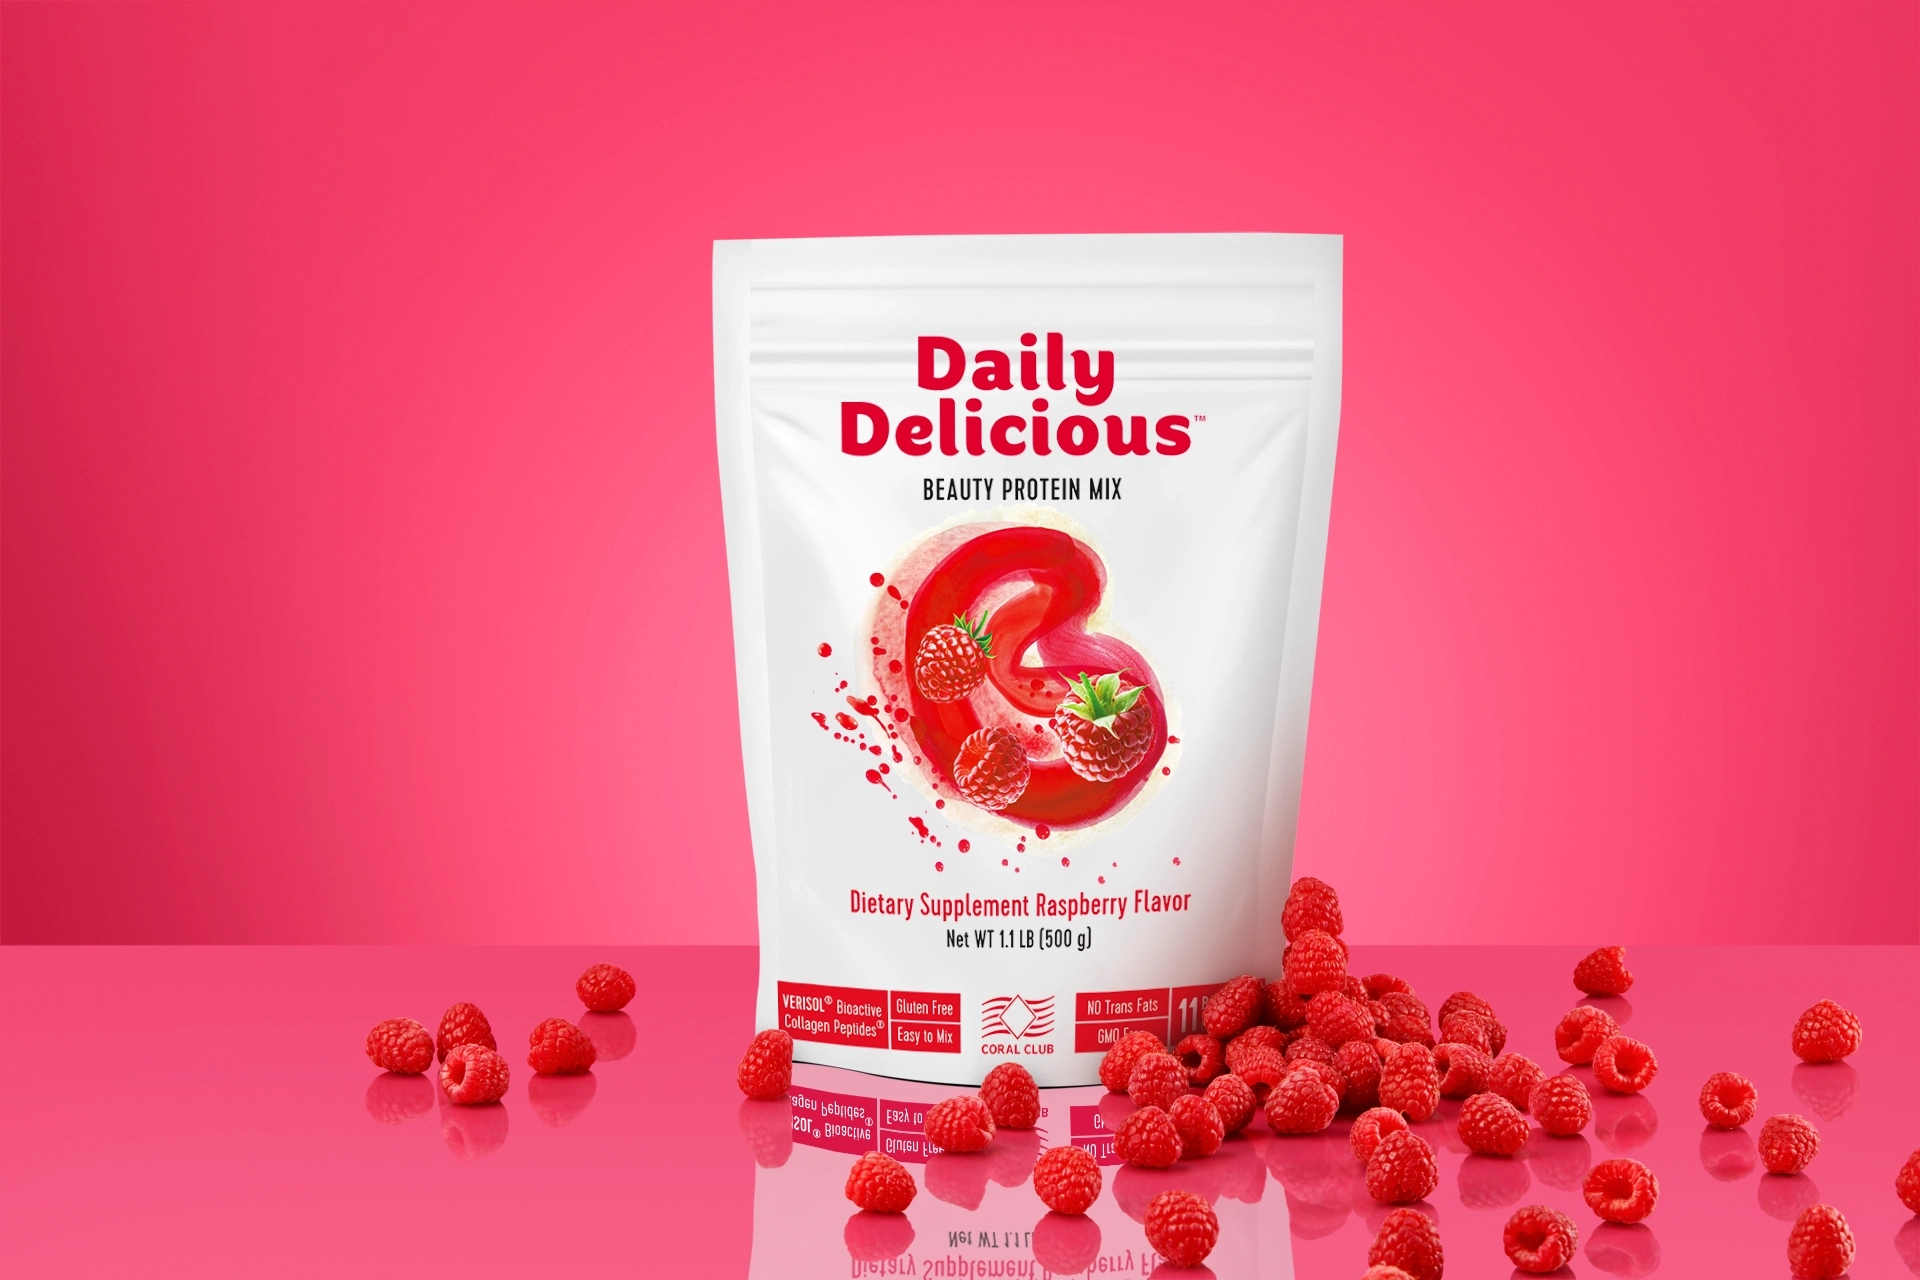 Daily Delicious Beauty Protein Mix Raspberry